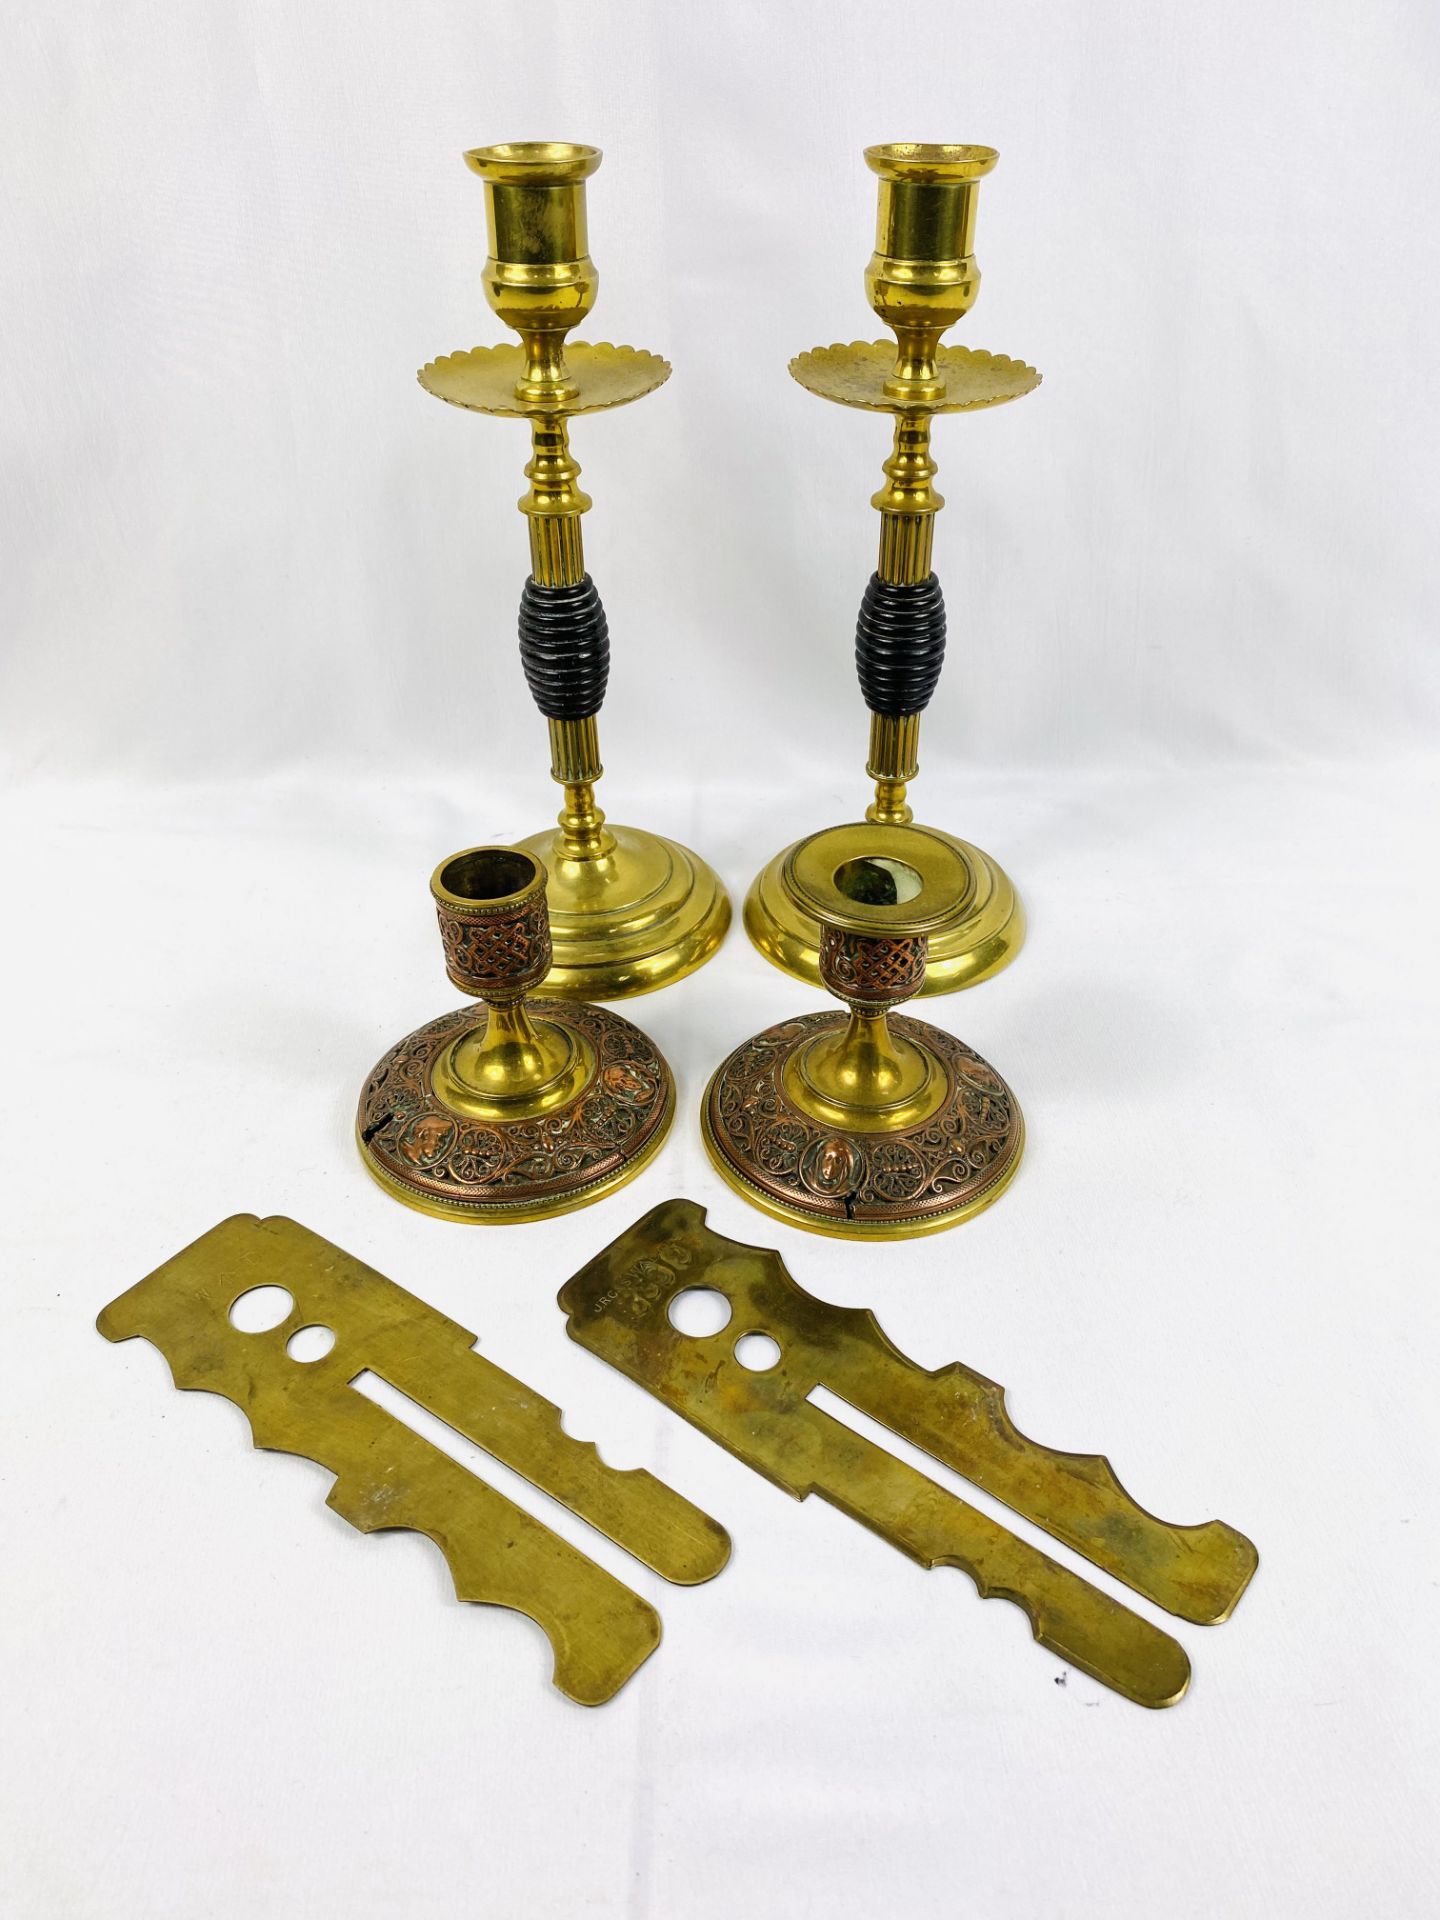 Pair of brass candlesticks and other items - Image 4 of 4